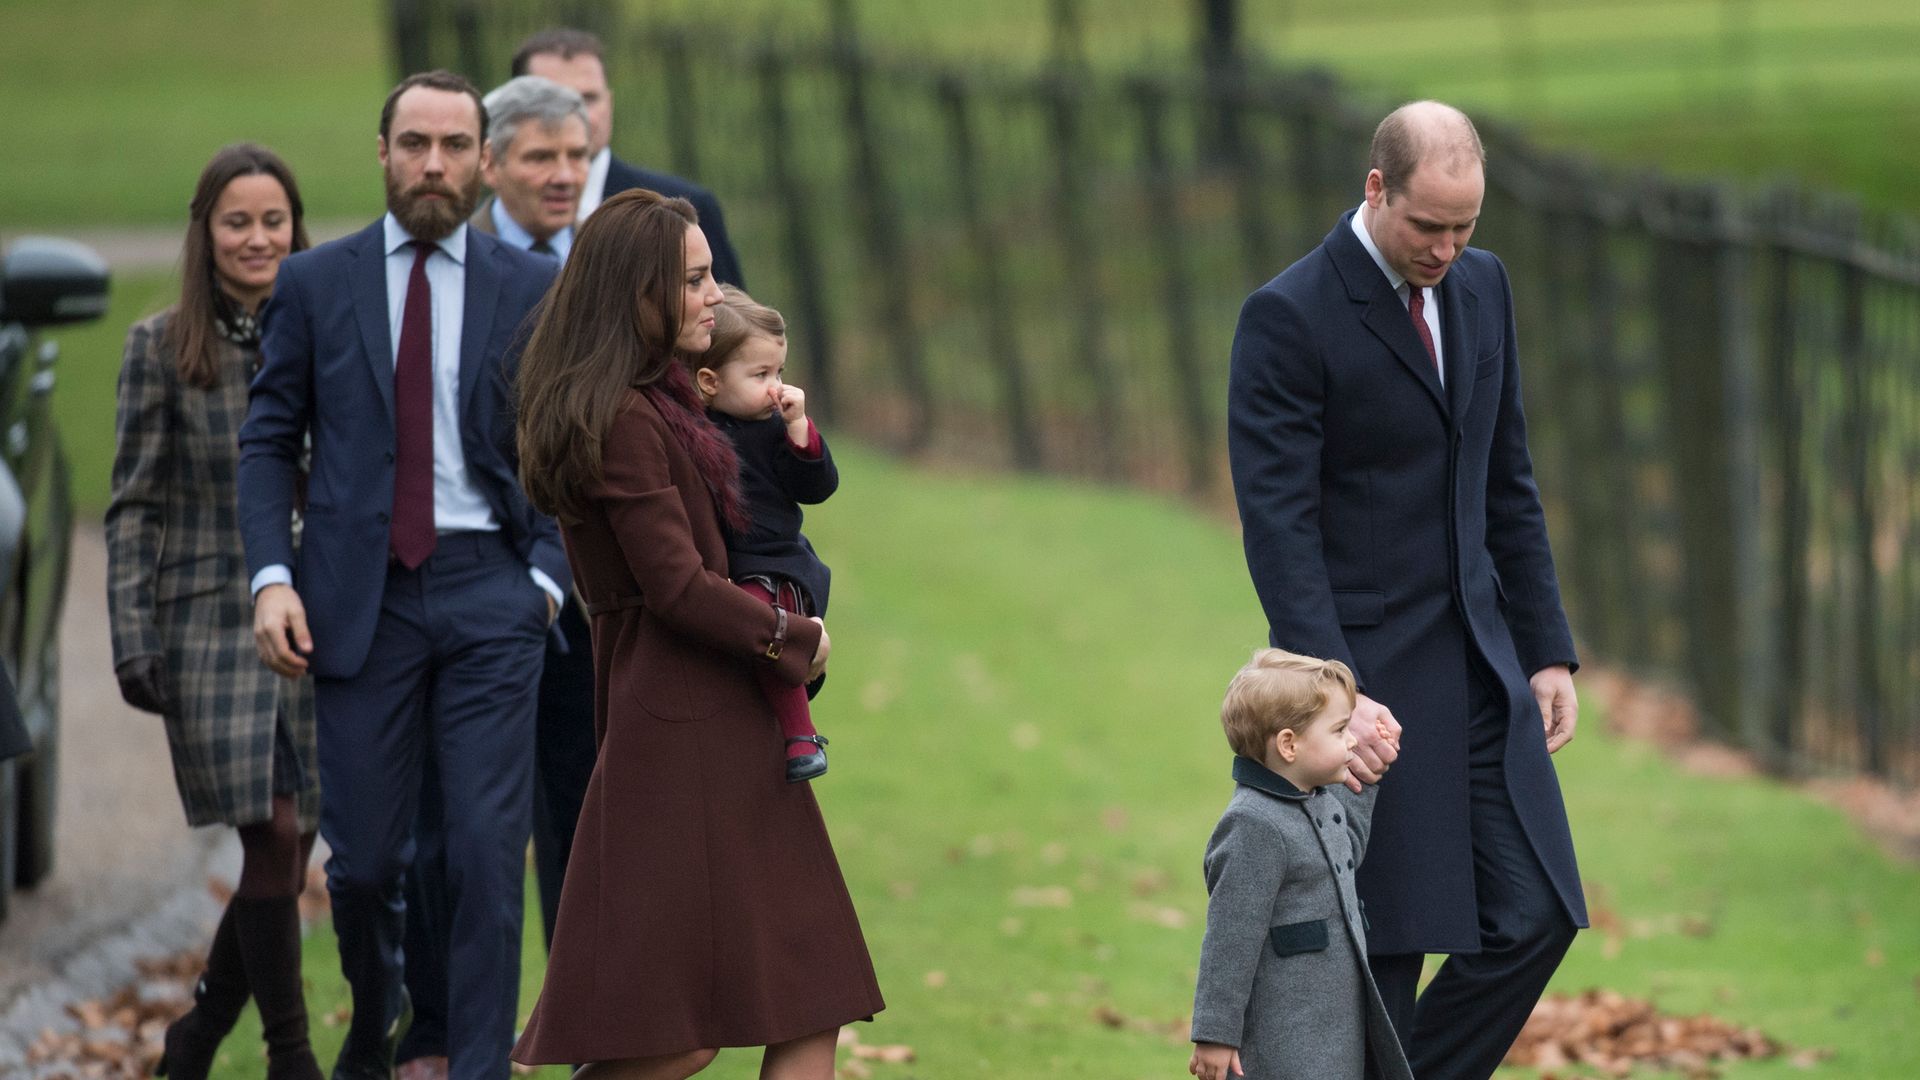 William, Kate, George, Charlotte attend church with Middleton family in 2016